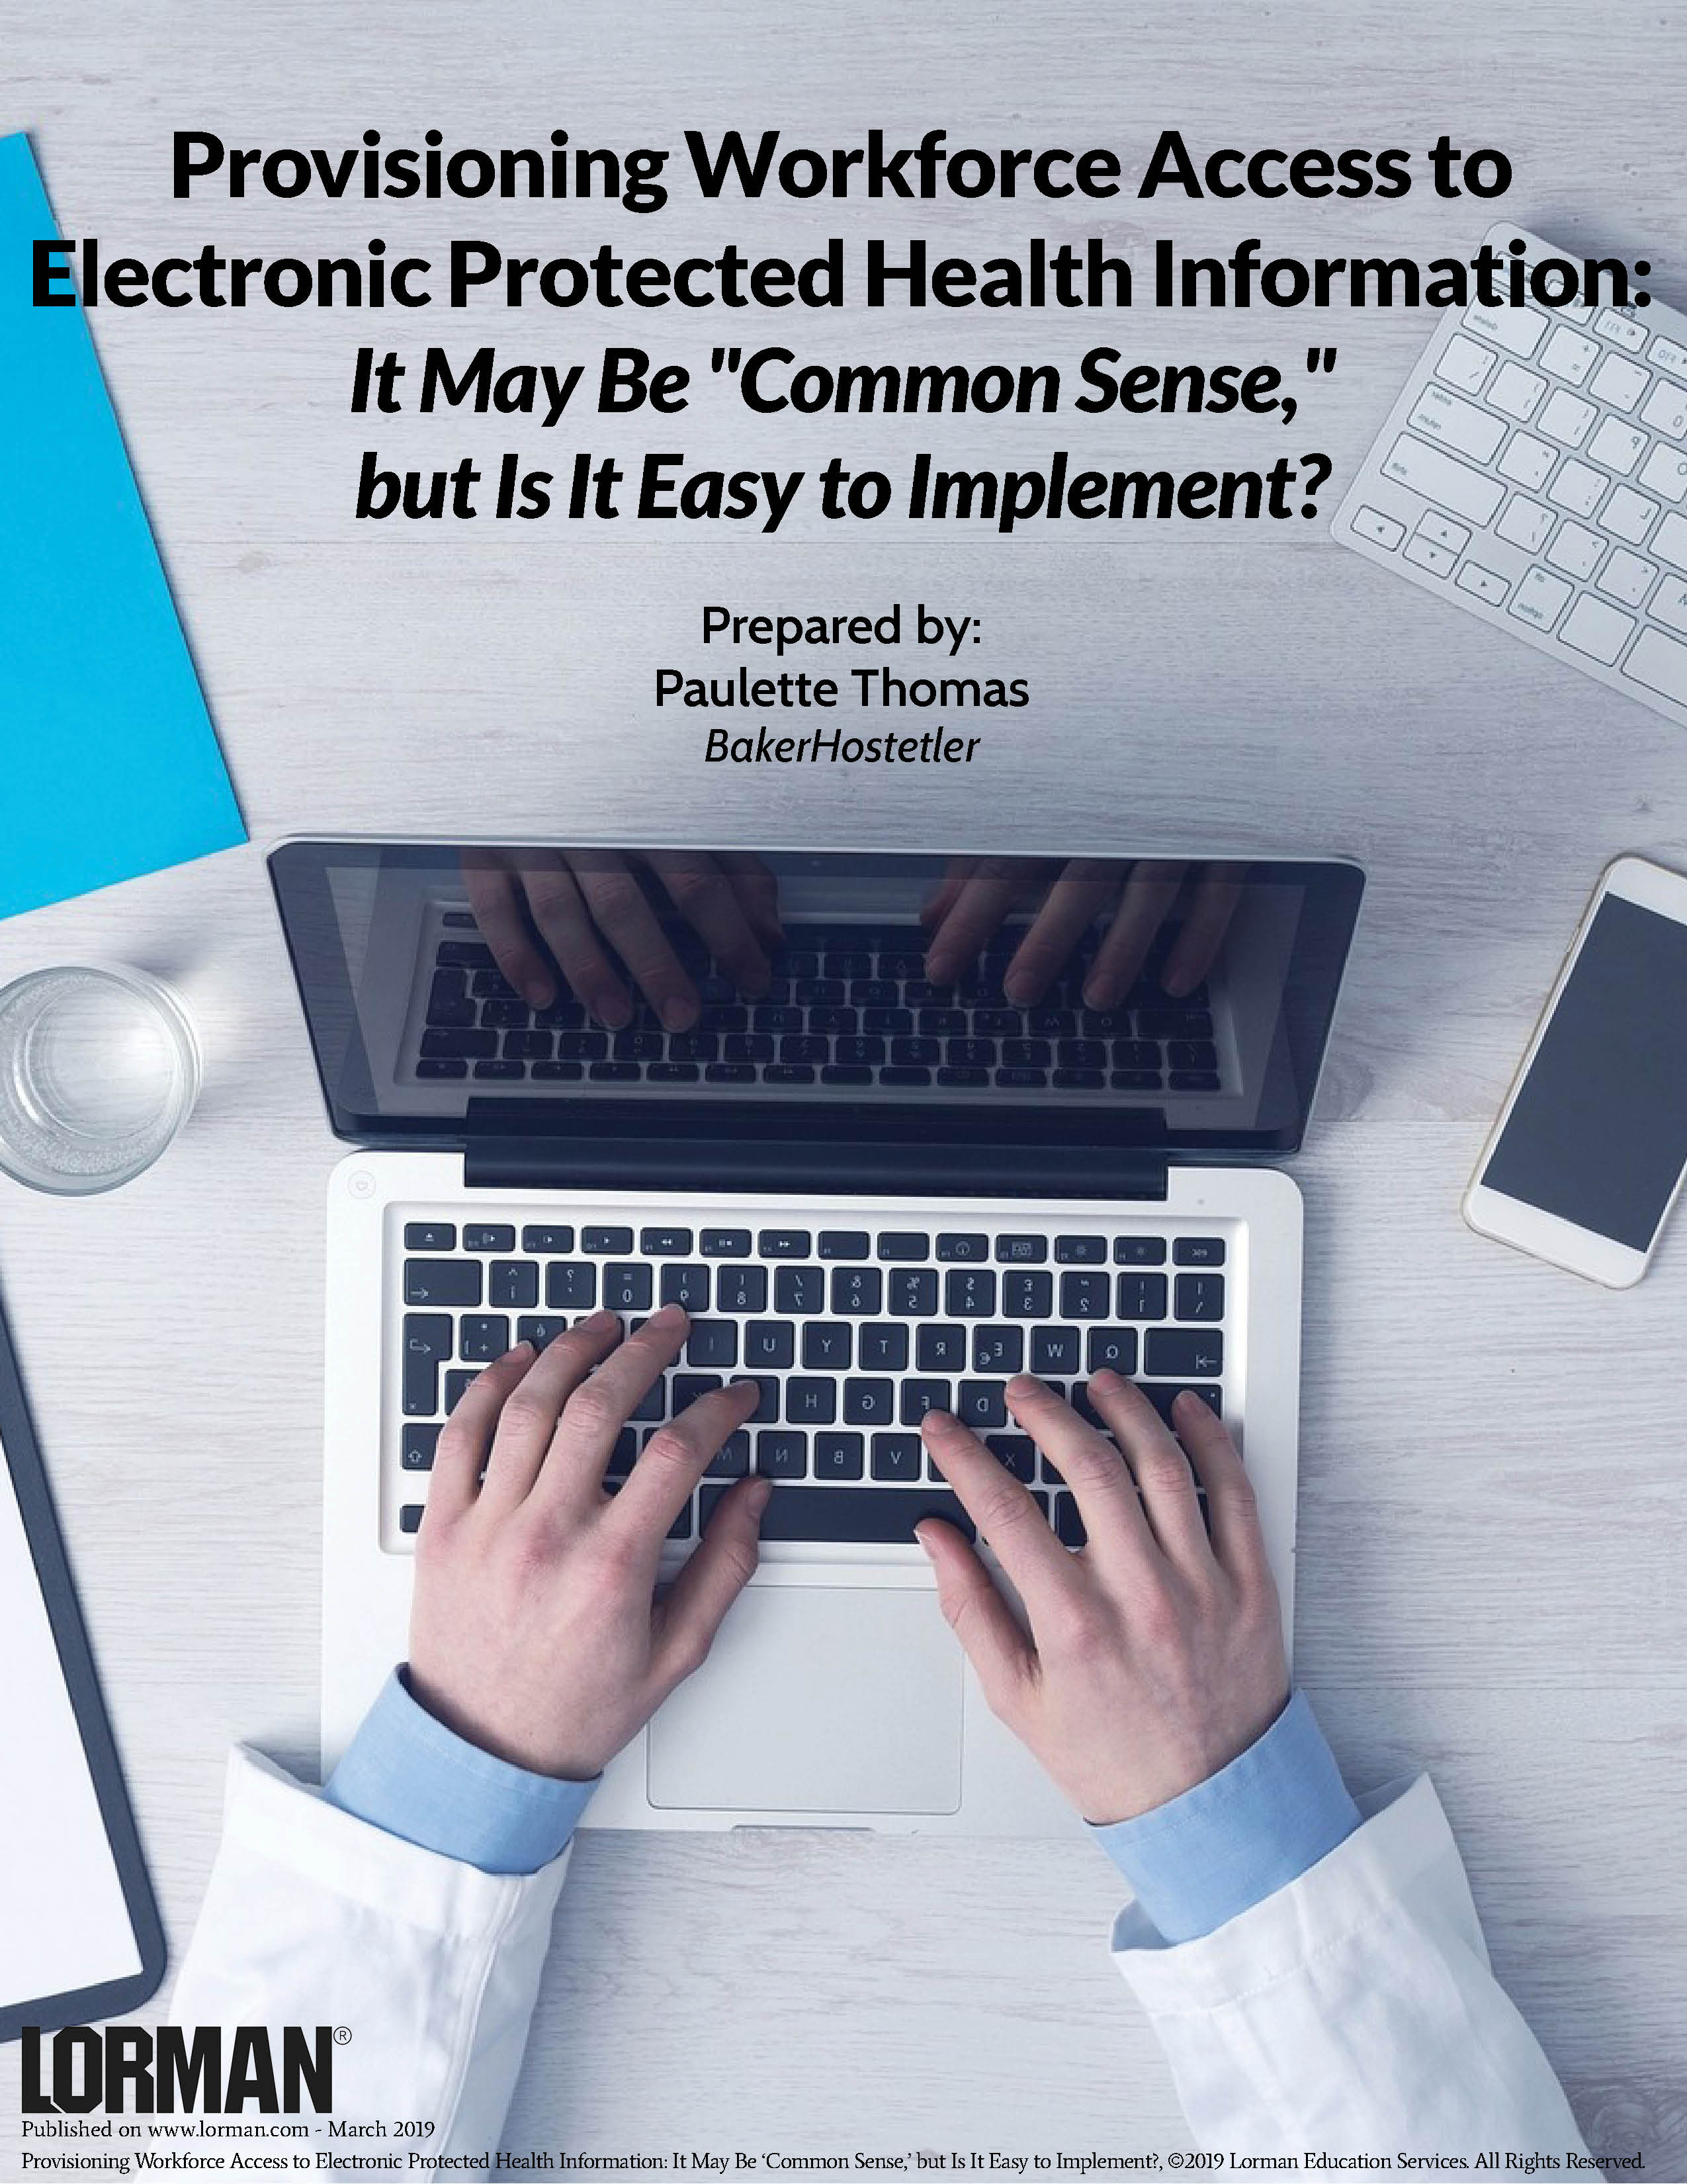 Provisioning Workforce Access to Electronic Protected Health Information